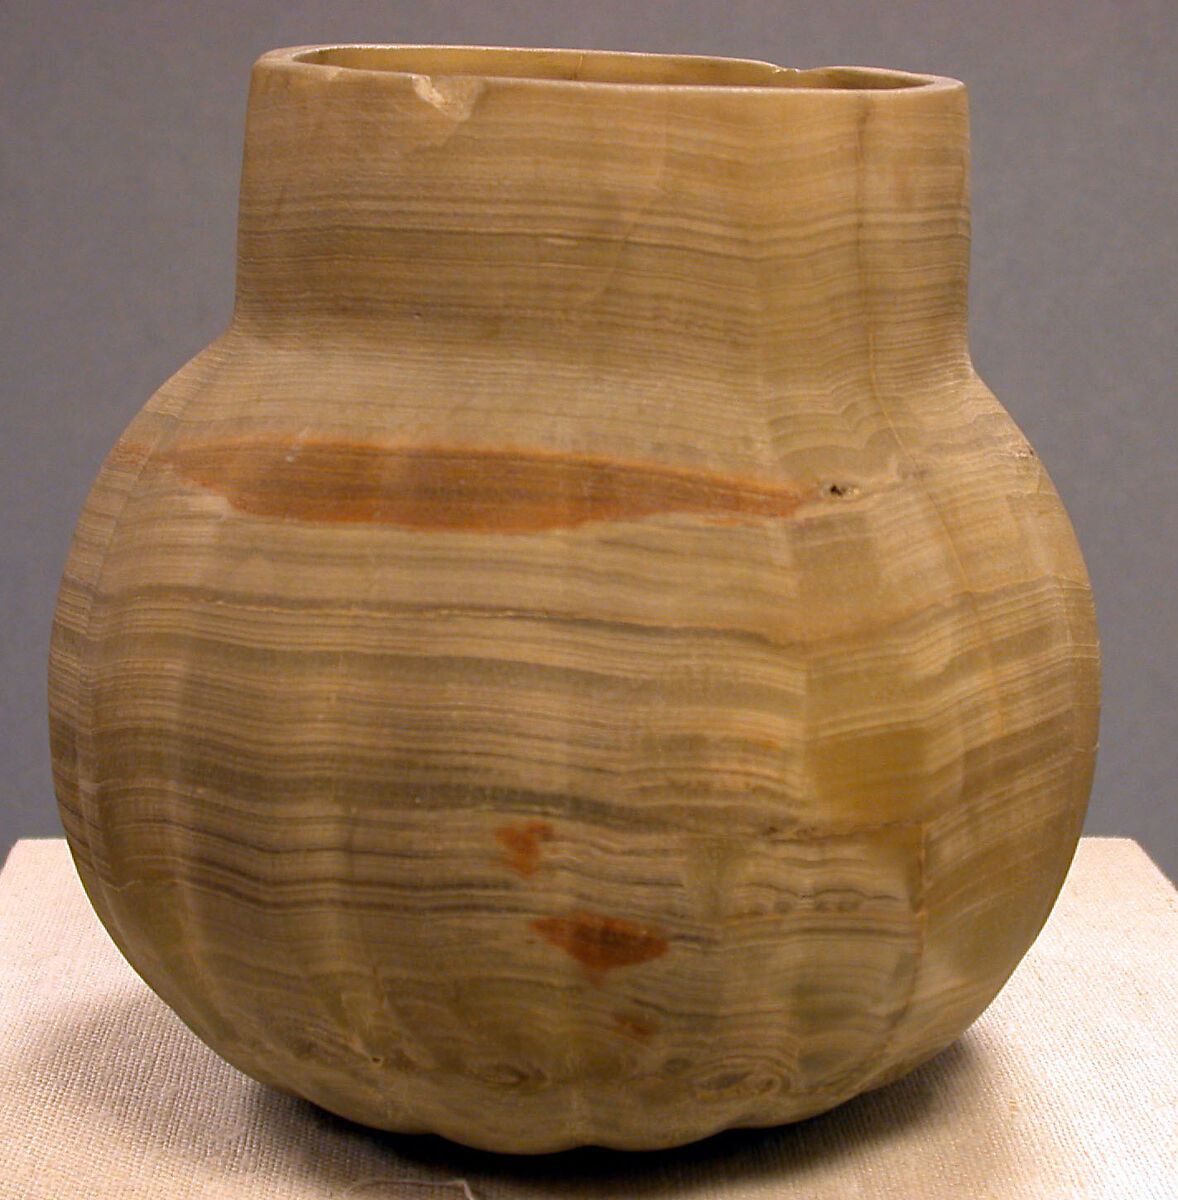 Gadrooned Onyx Vessel, Onyx marble (tecalli), Mexican 